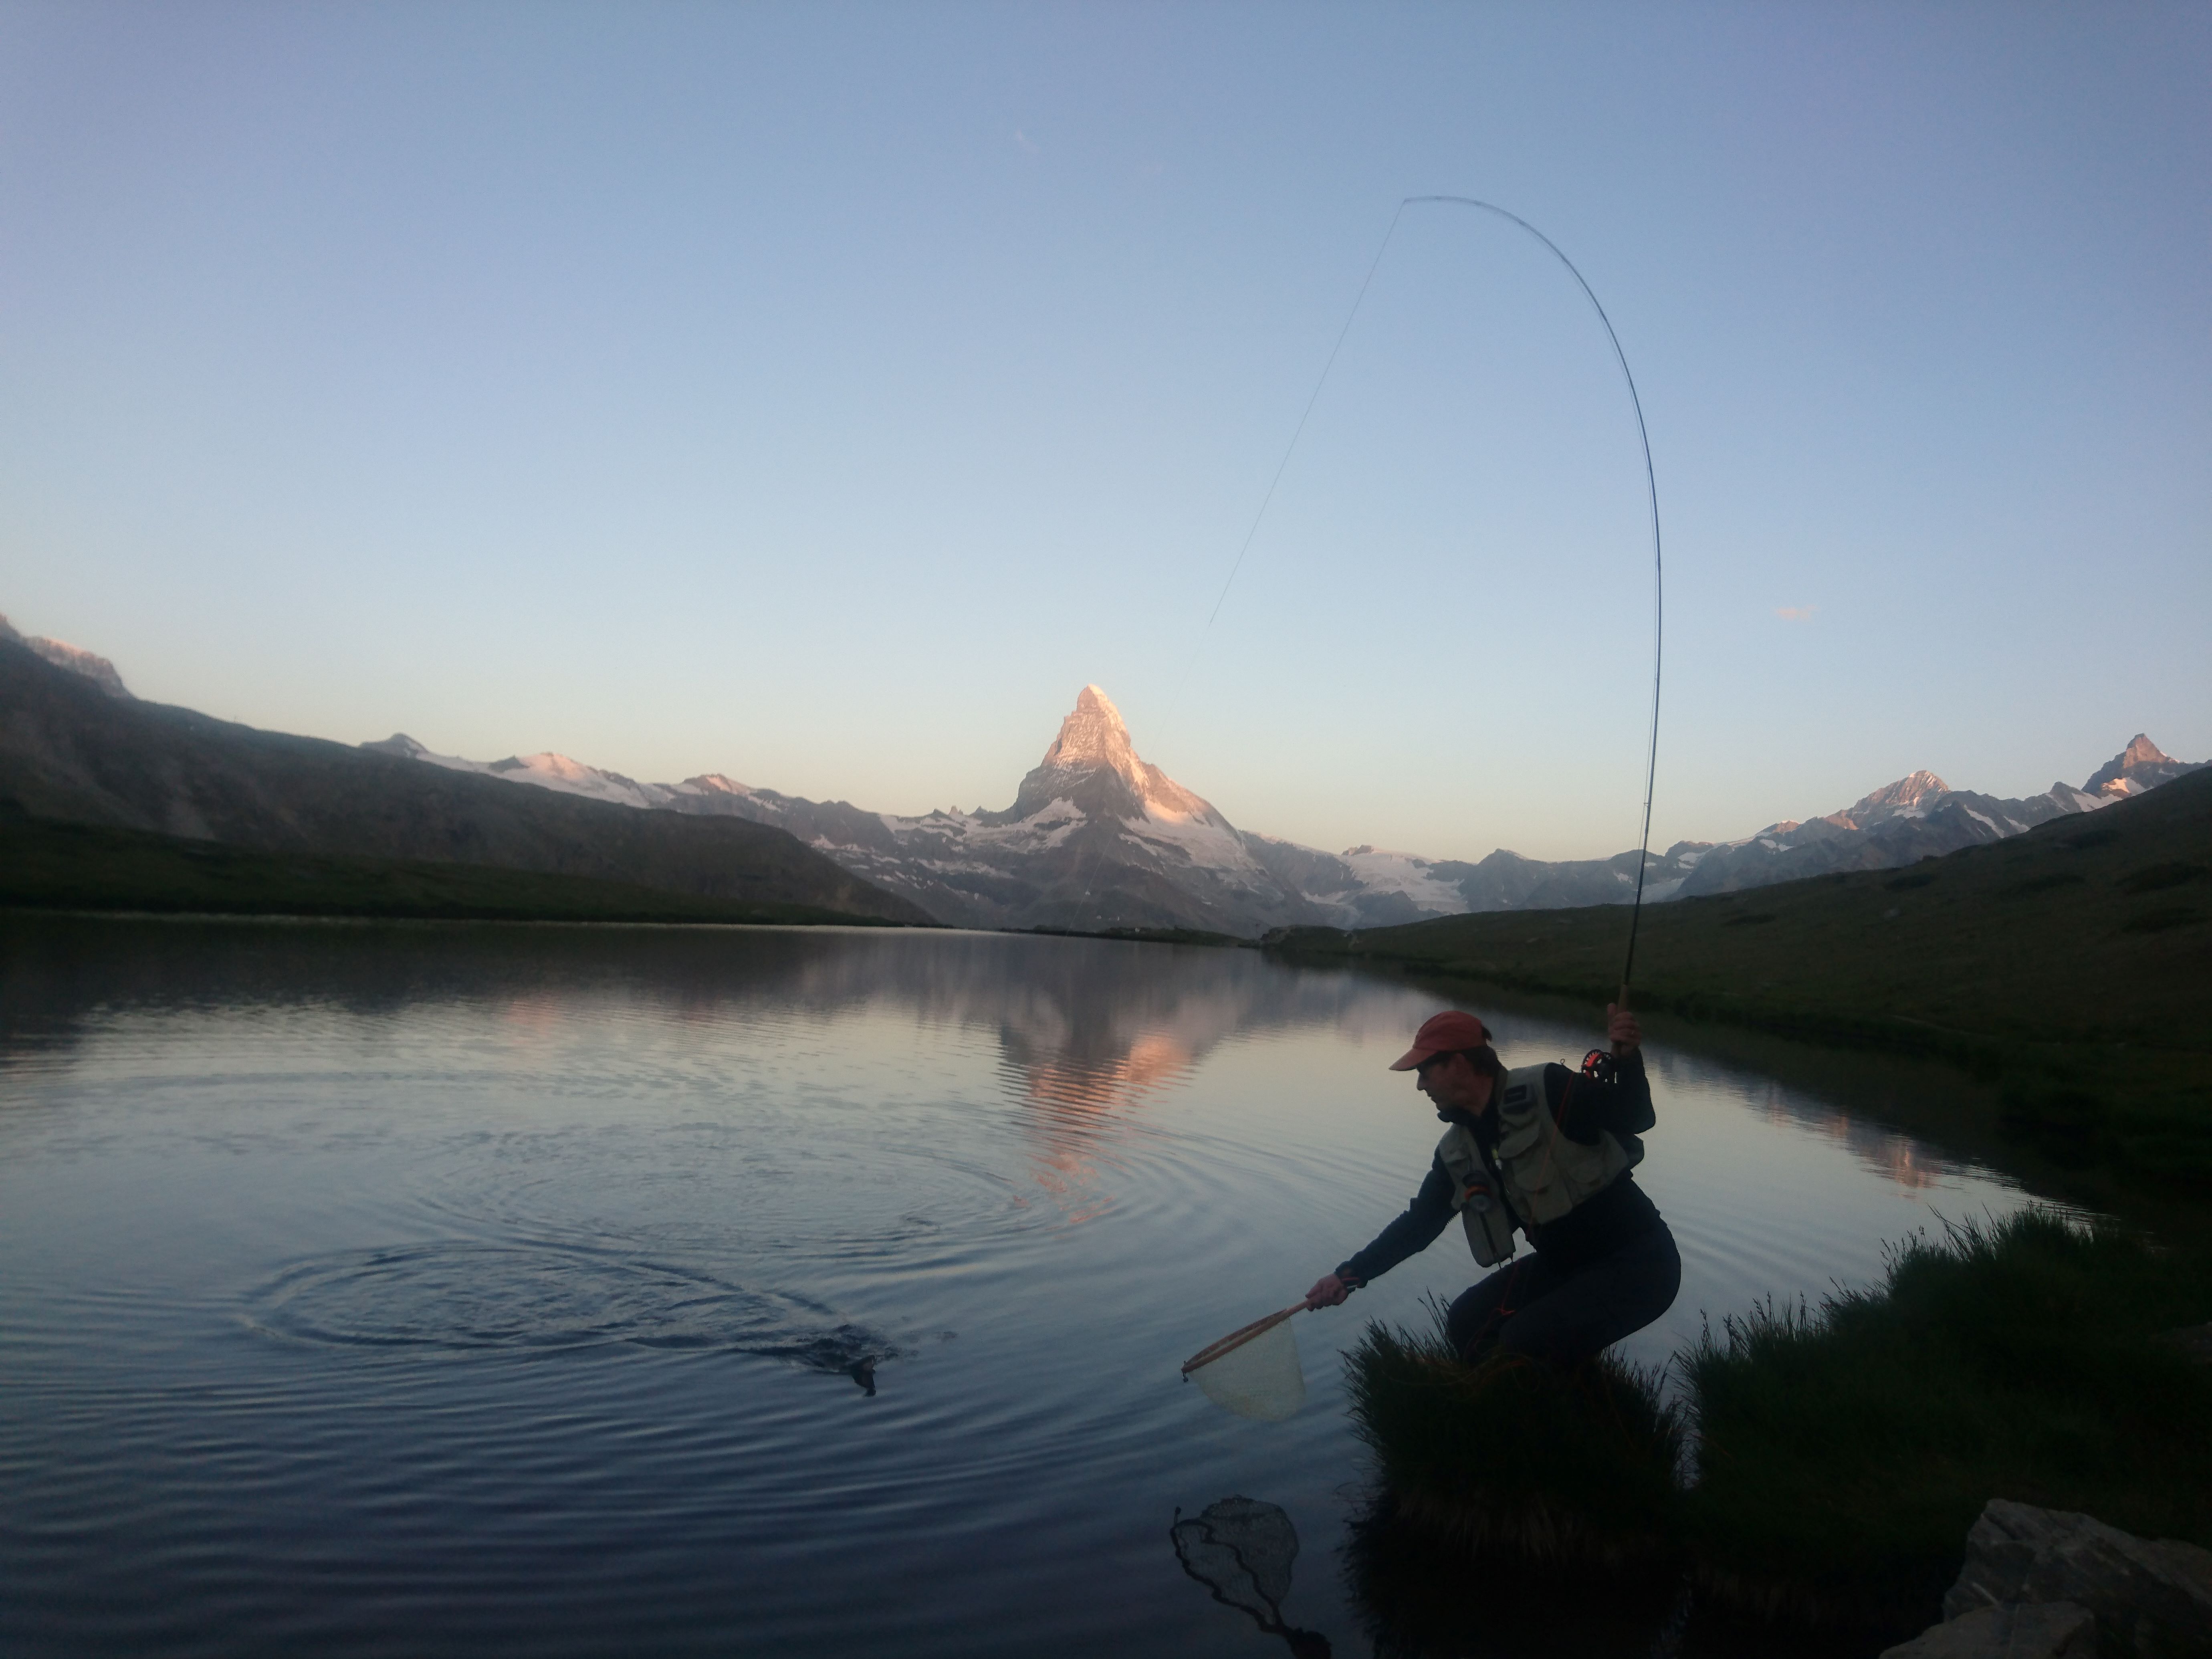 Fly Fishing in Switzerland, landing a trout with a bent rod and the sun just rising on the tip of the Matterhorn